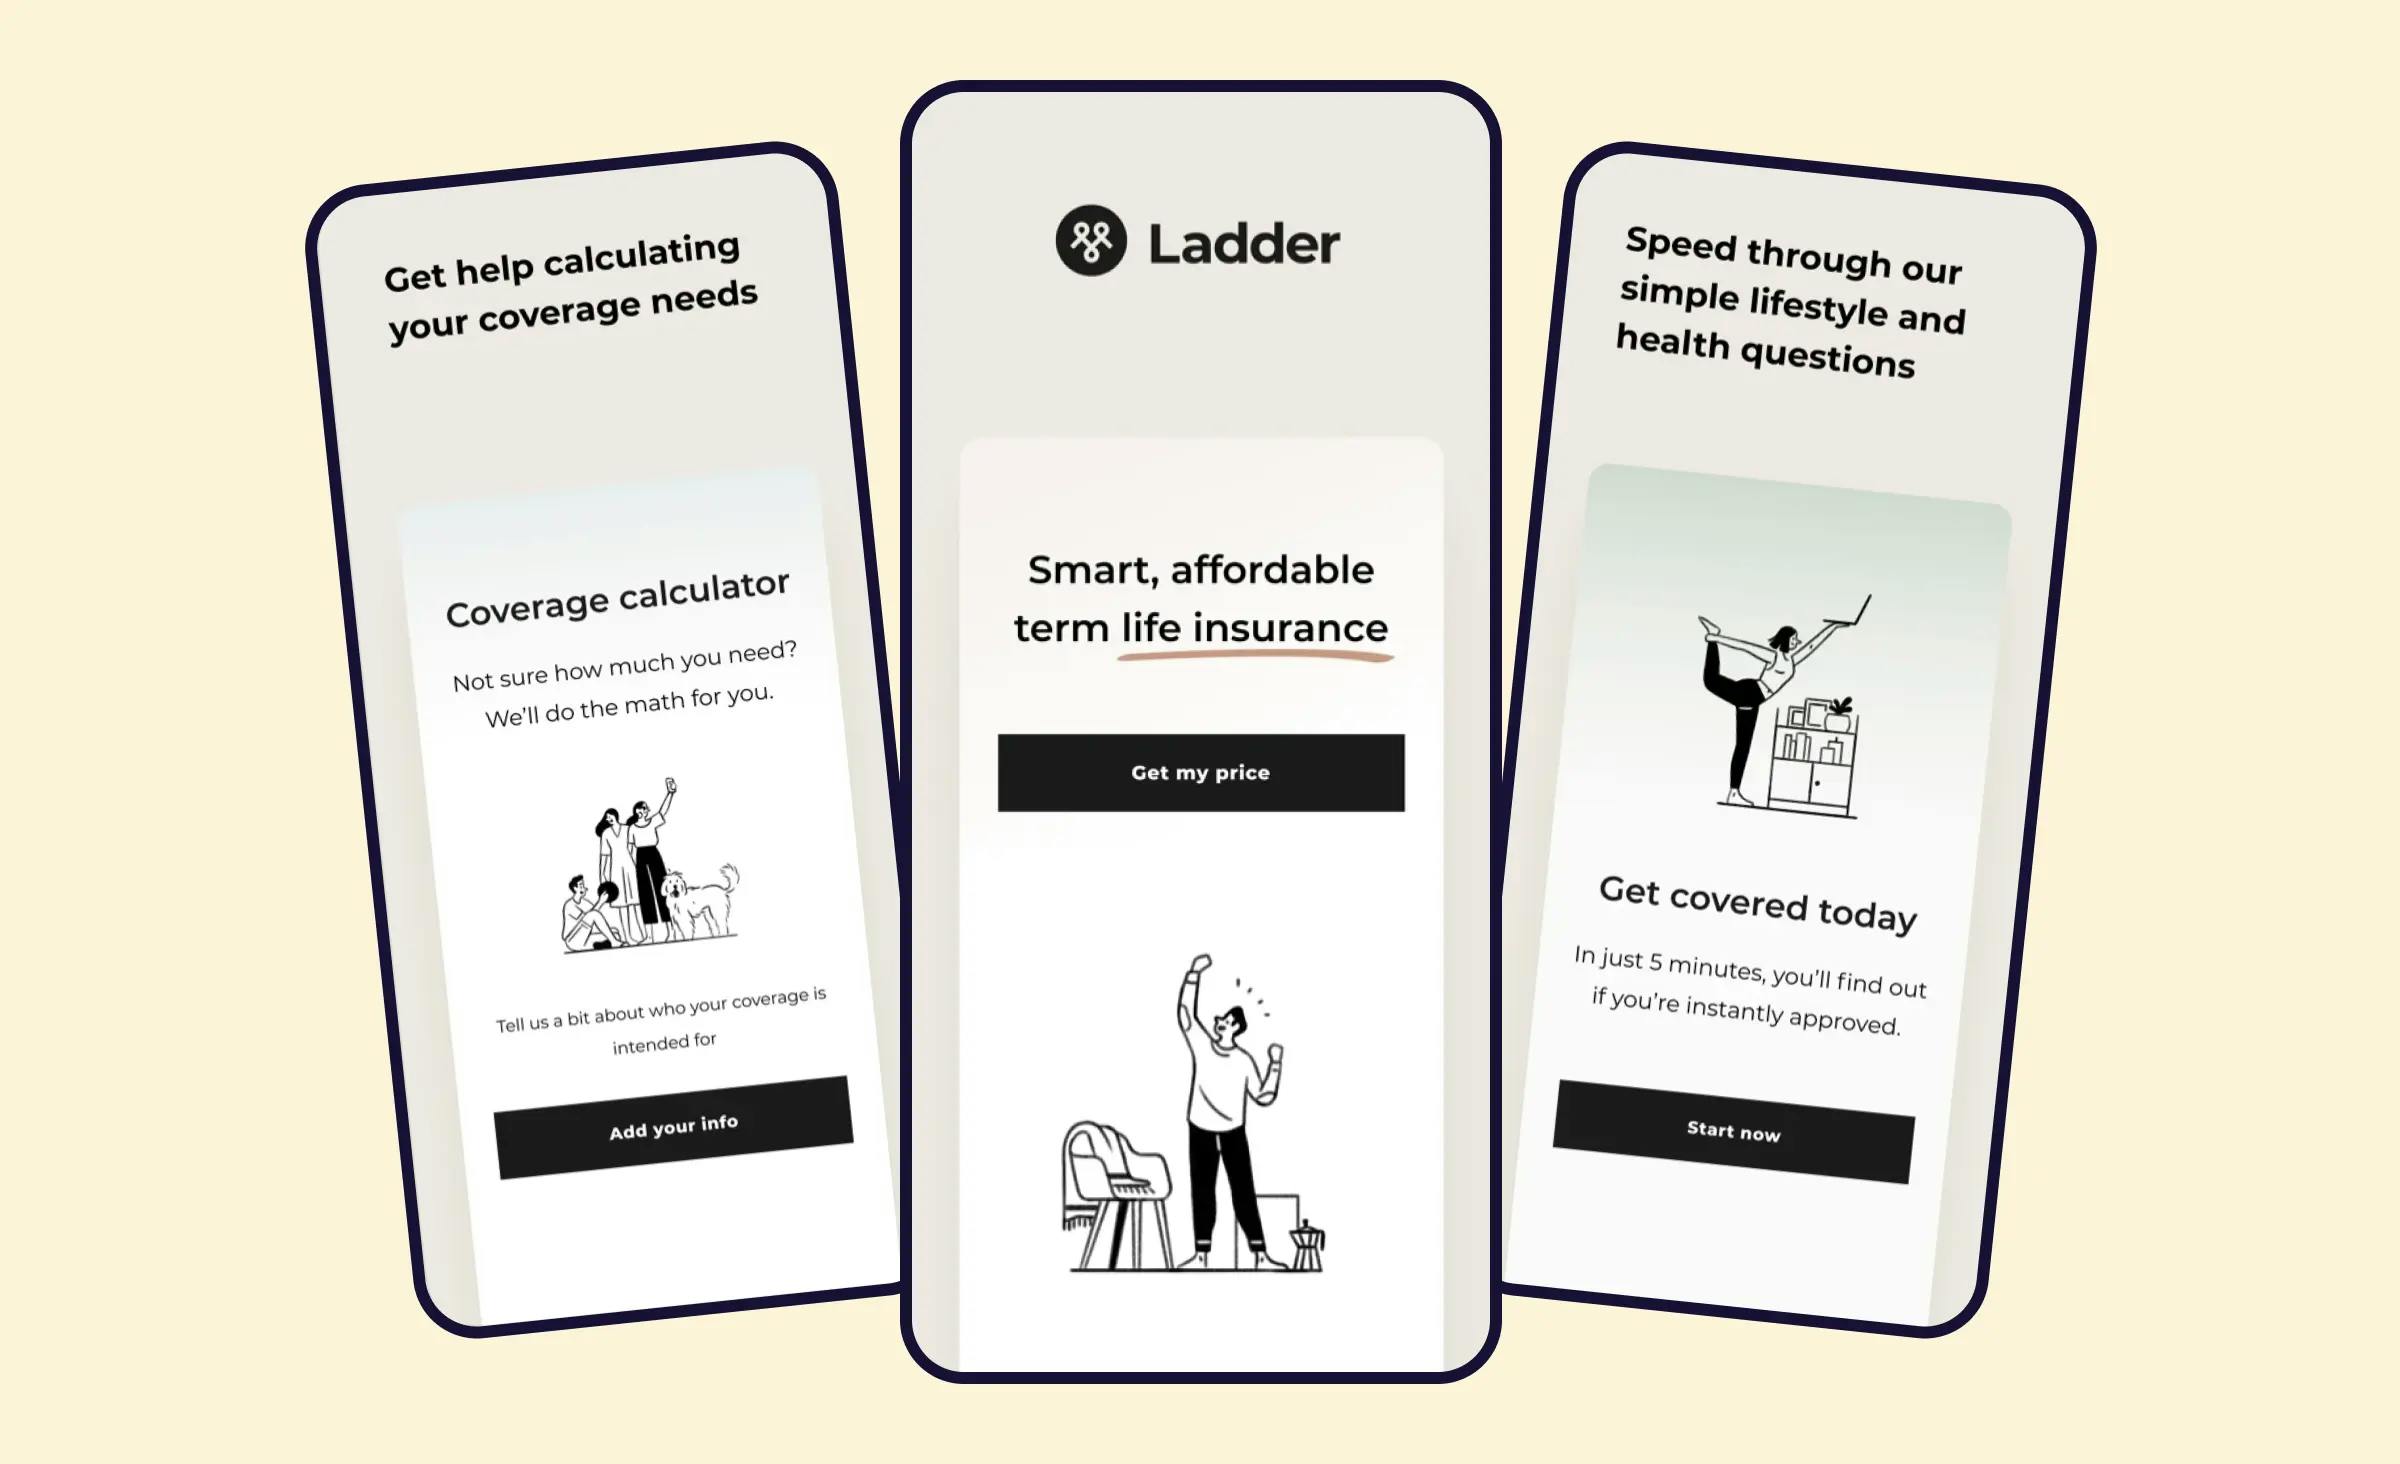 Three screenshots of the Ladder life insurance mobile application featuring a minimalist black and white design. The screens display calls to action encouraging users to create an account. The screens are decorated with illustrations of people.